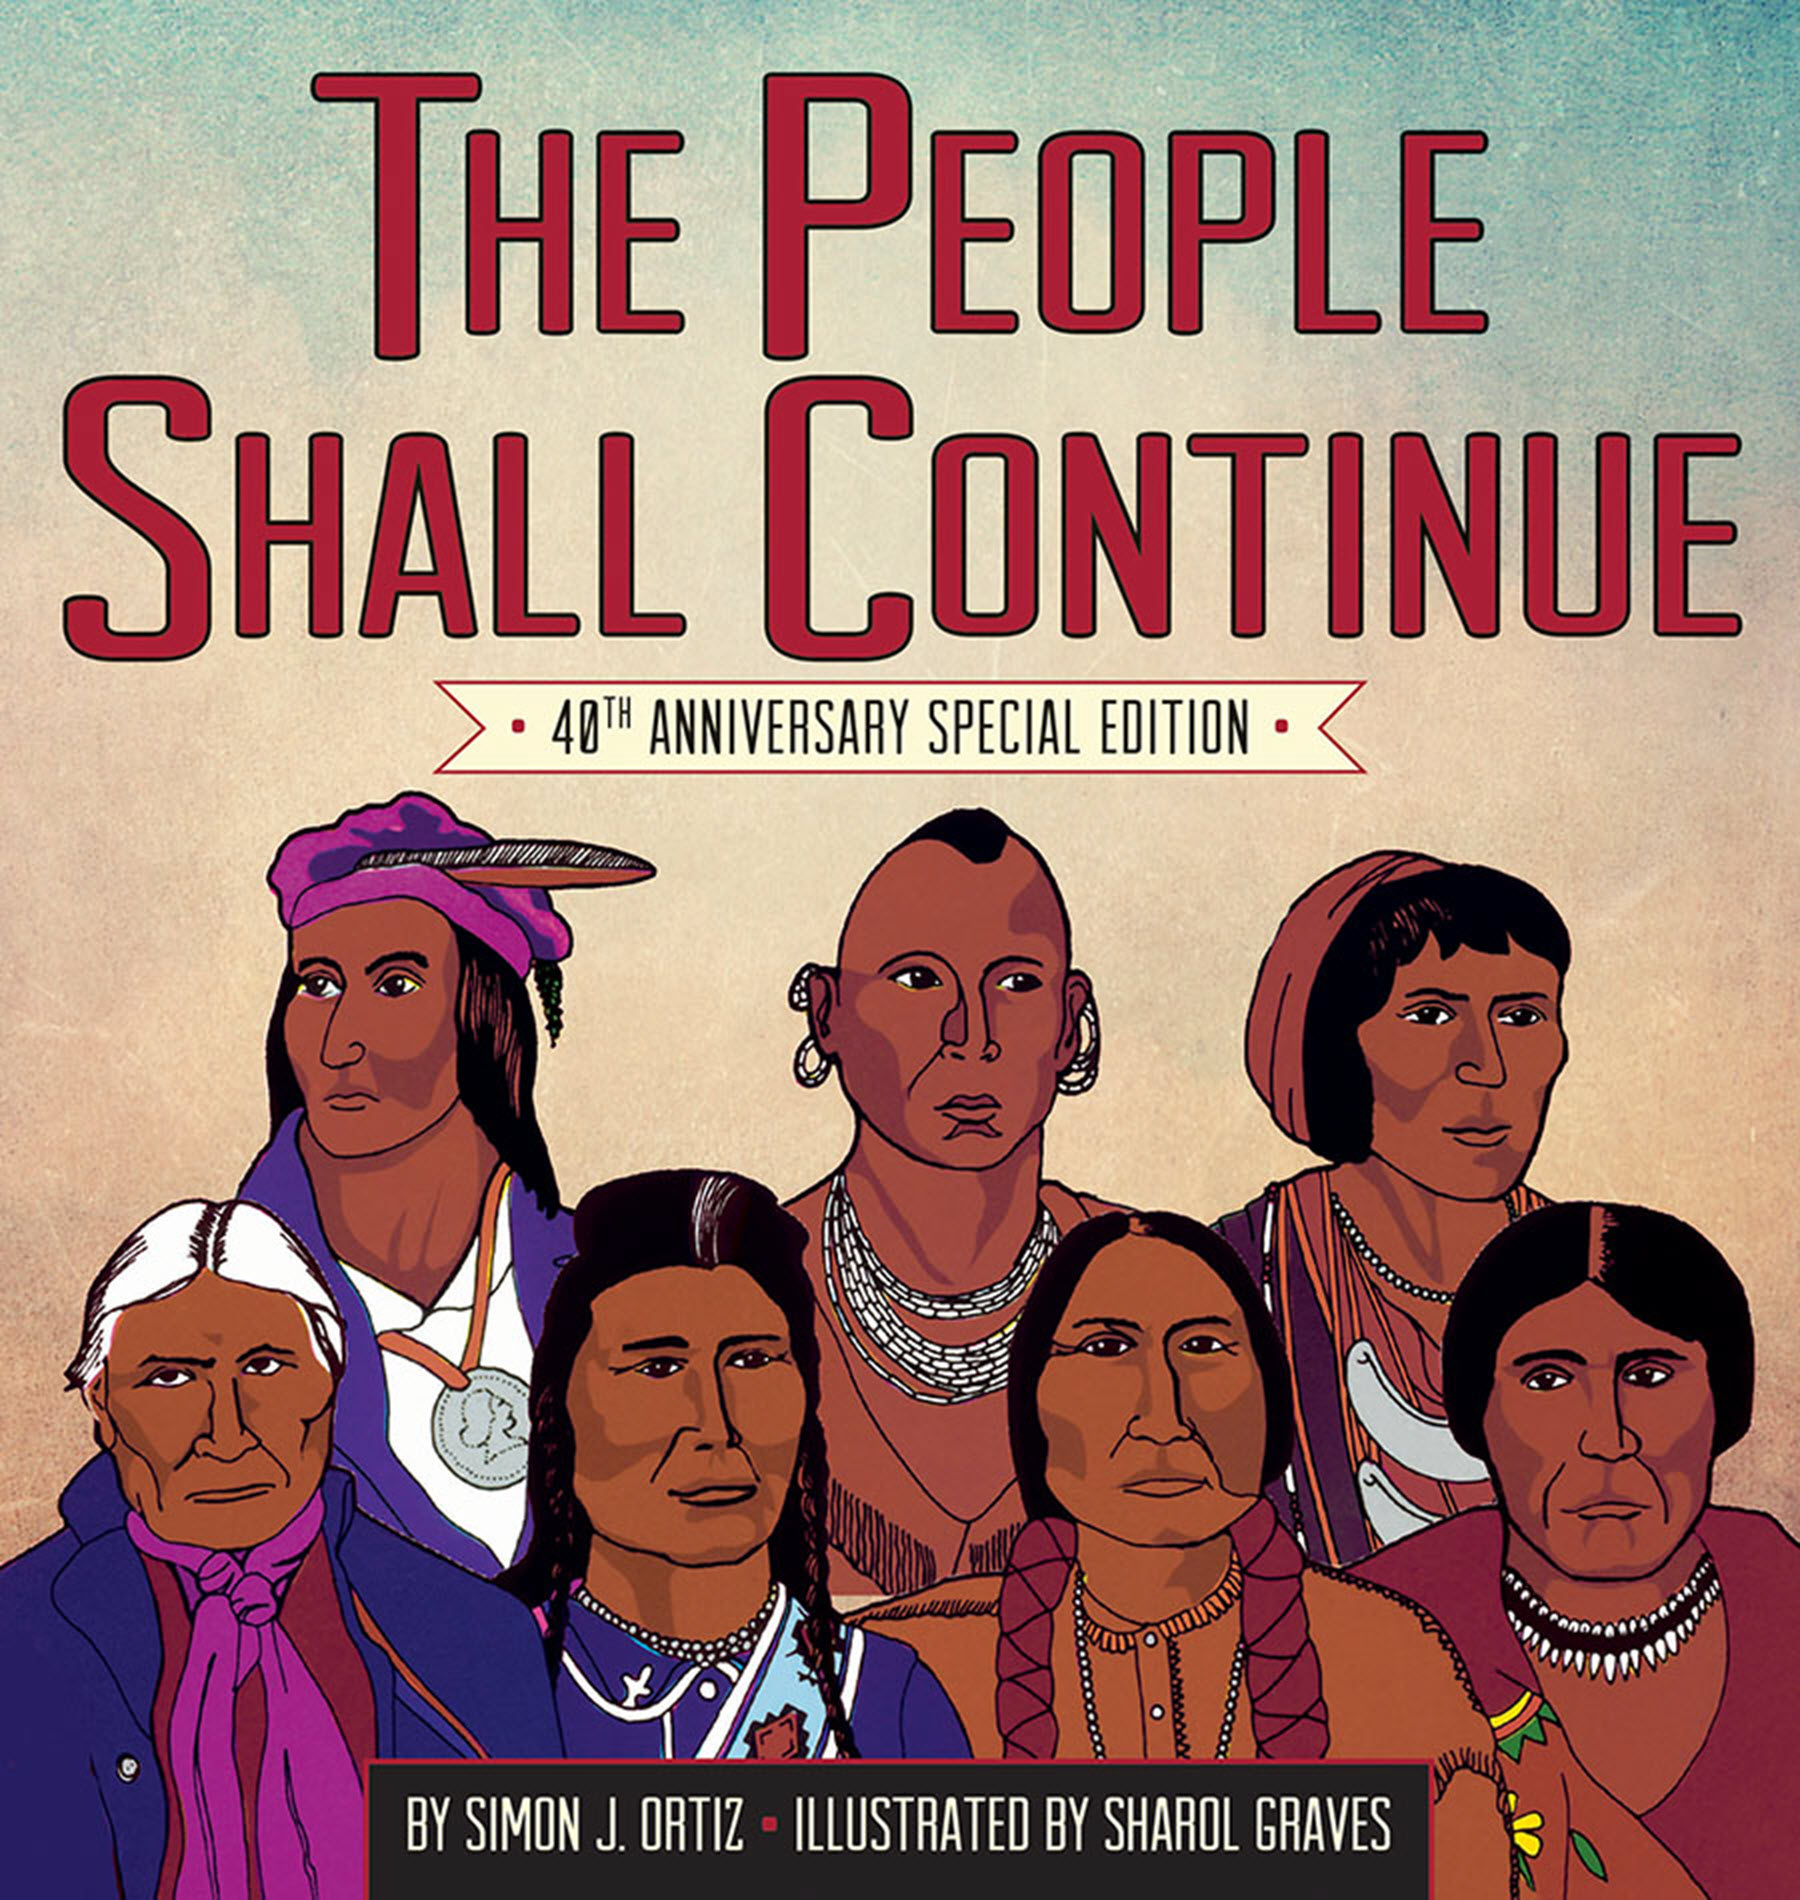 Cover of "The People Shall Continue" by Simon Ortiz